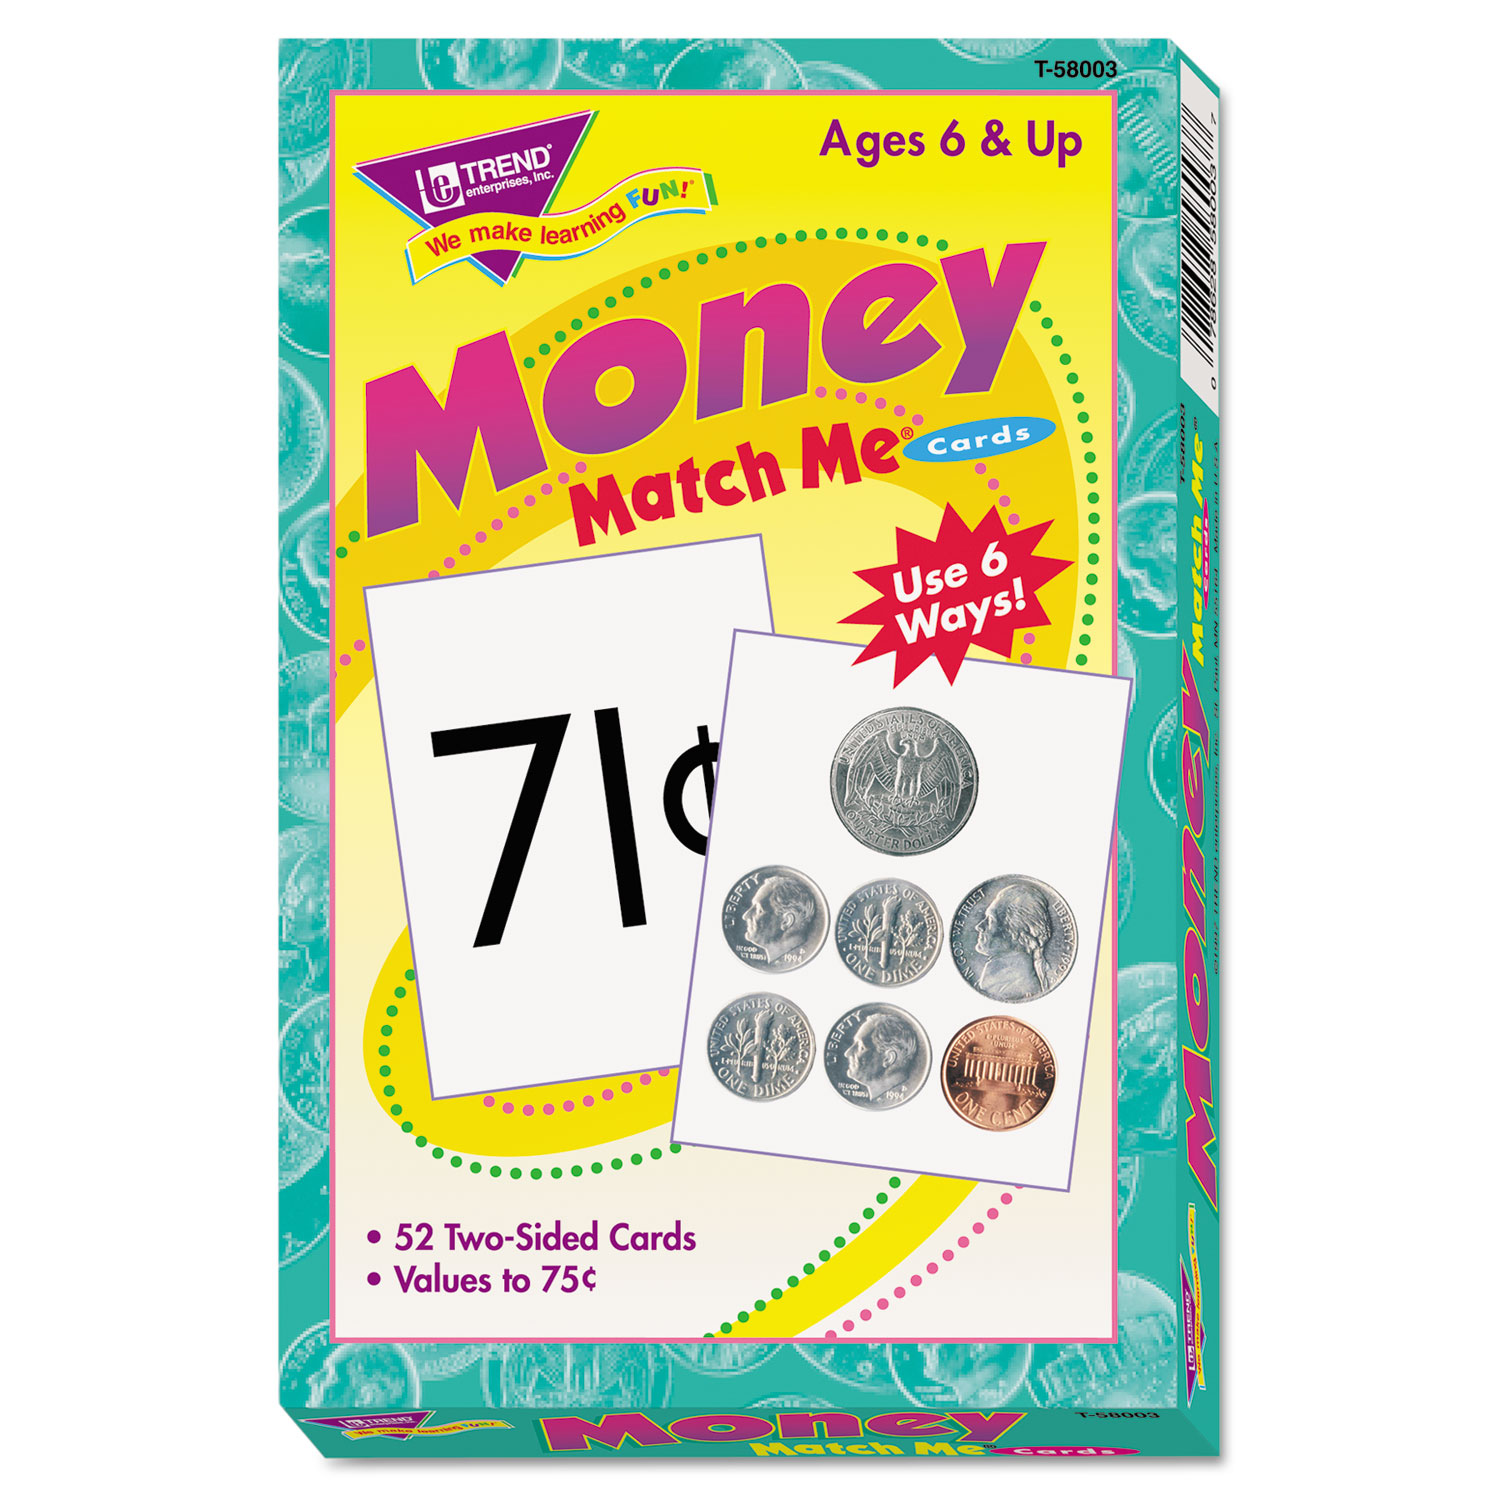  TREND T58003 Match Me Cards, Money-US Currency, 52 Cards, Ages 6 and Up (TEPT58003) 